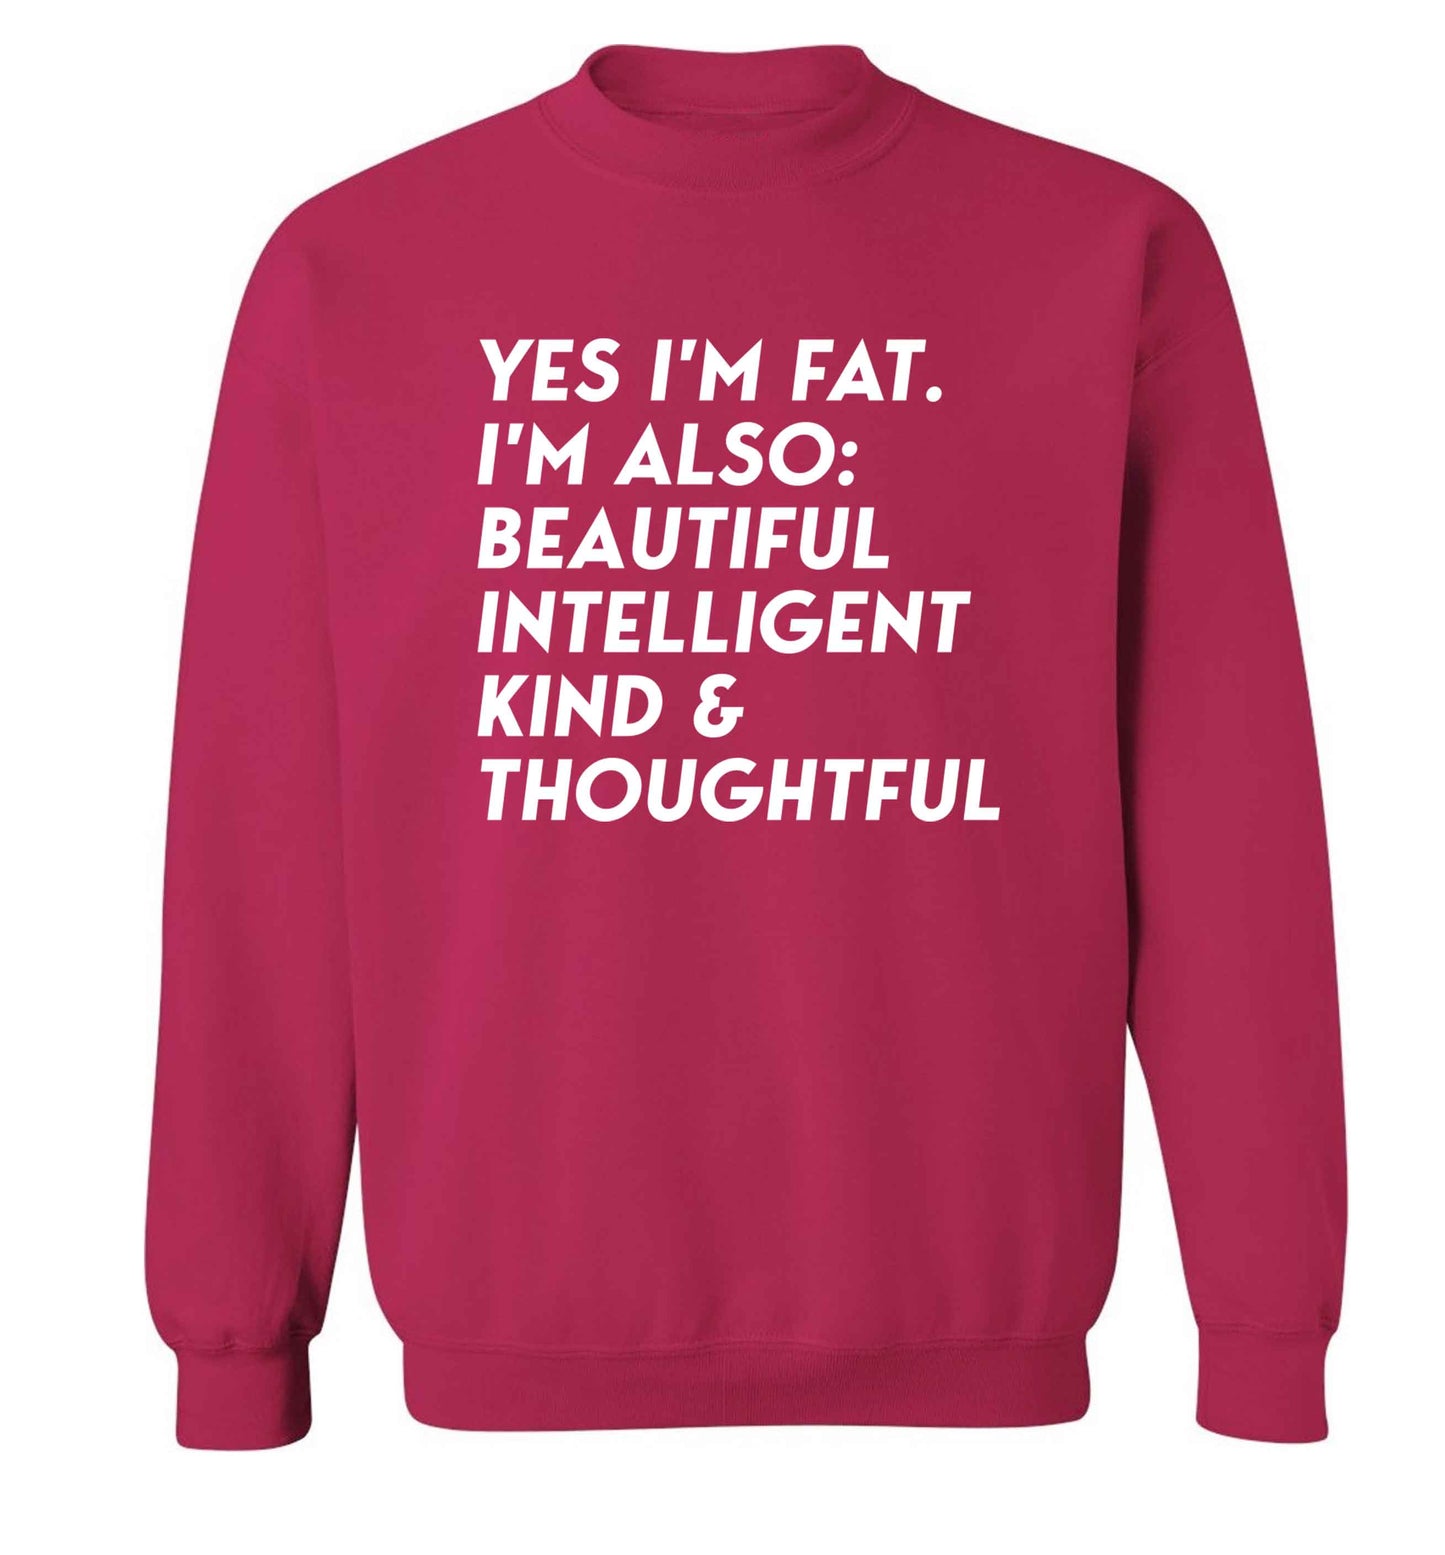 Yes I'm fat. I'm also: Beautiful intelligent kind and thoughtful adult's unisex pink sweater 2XL